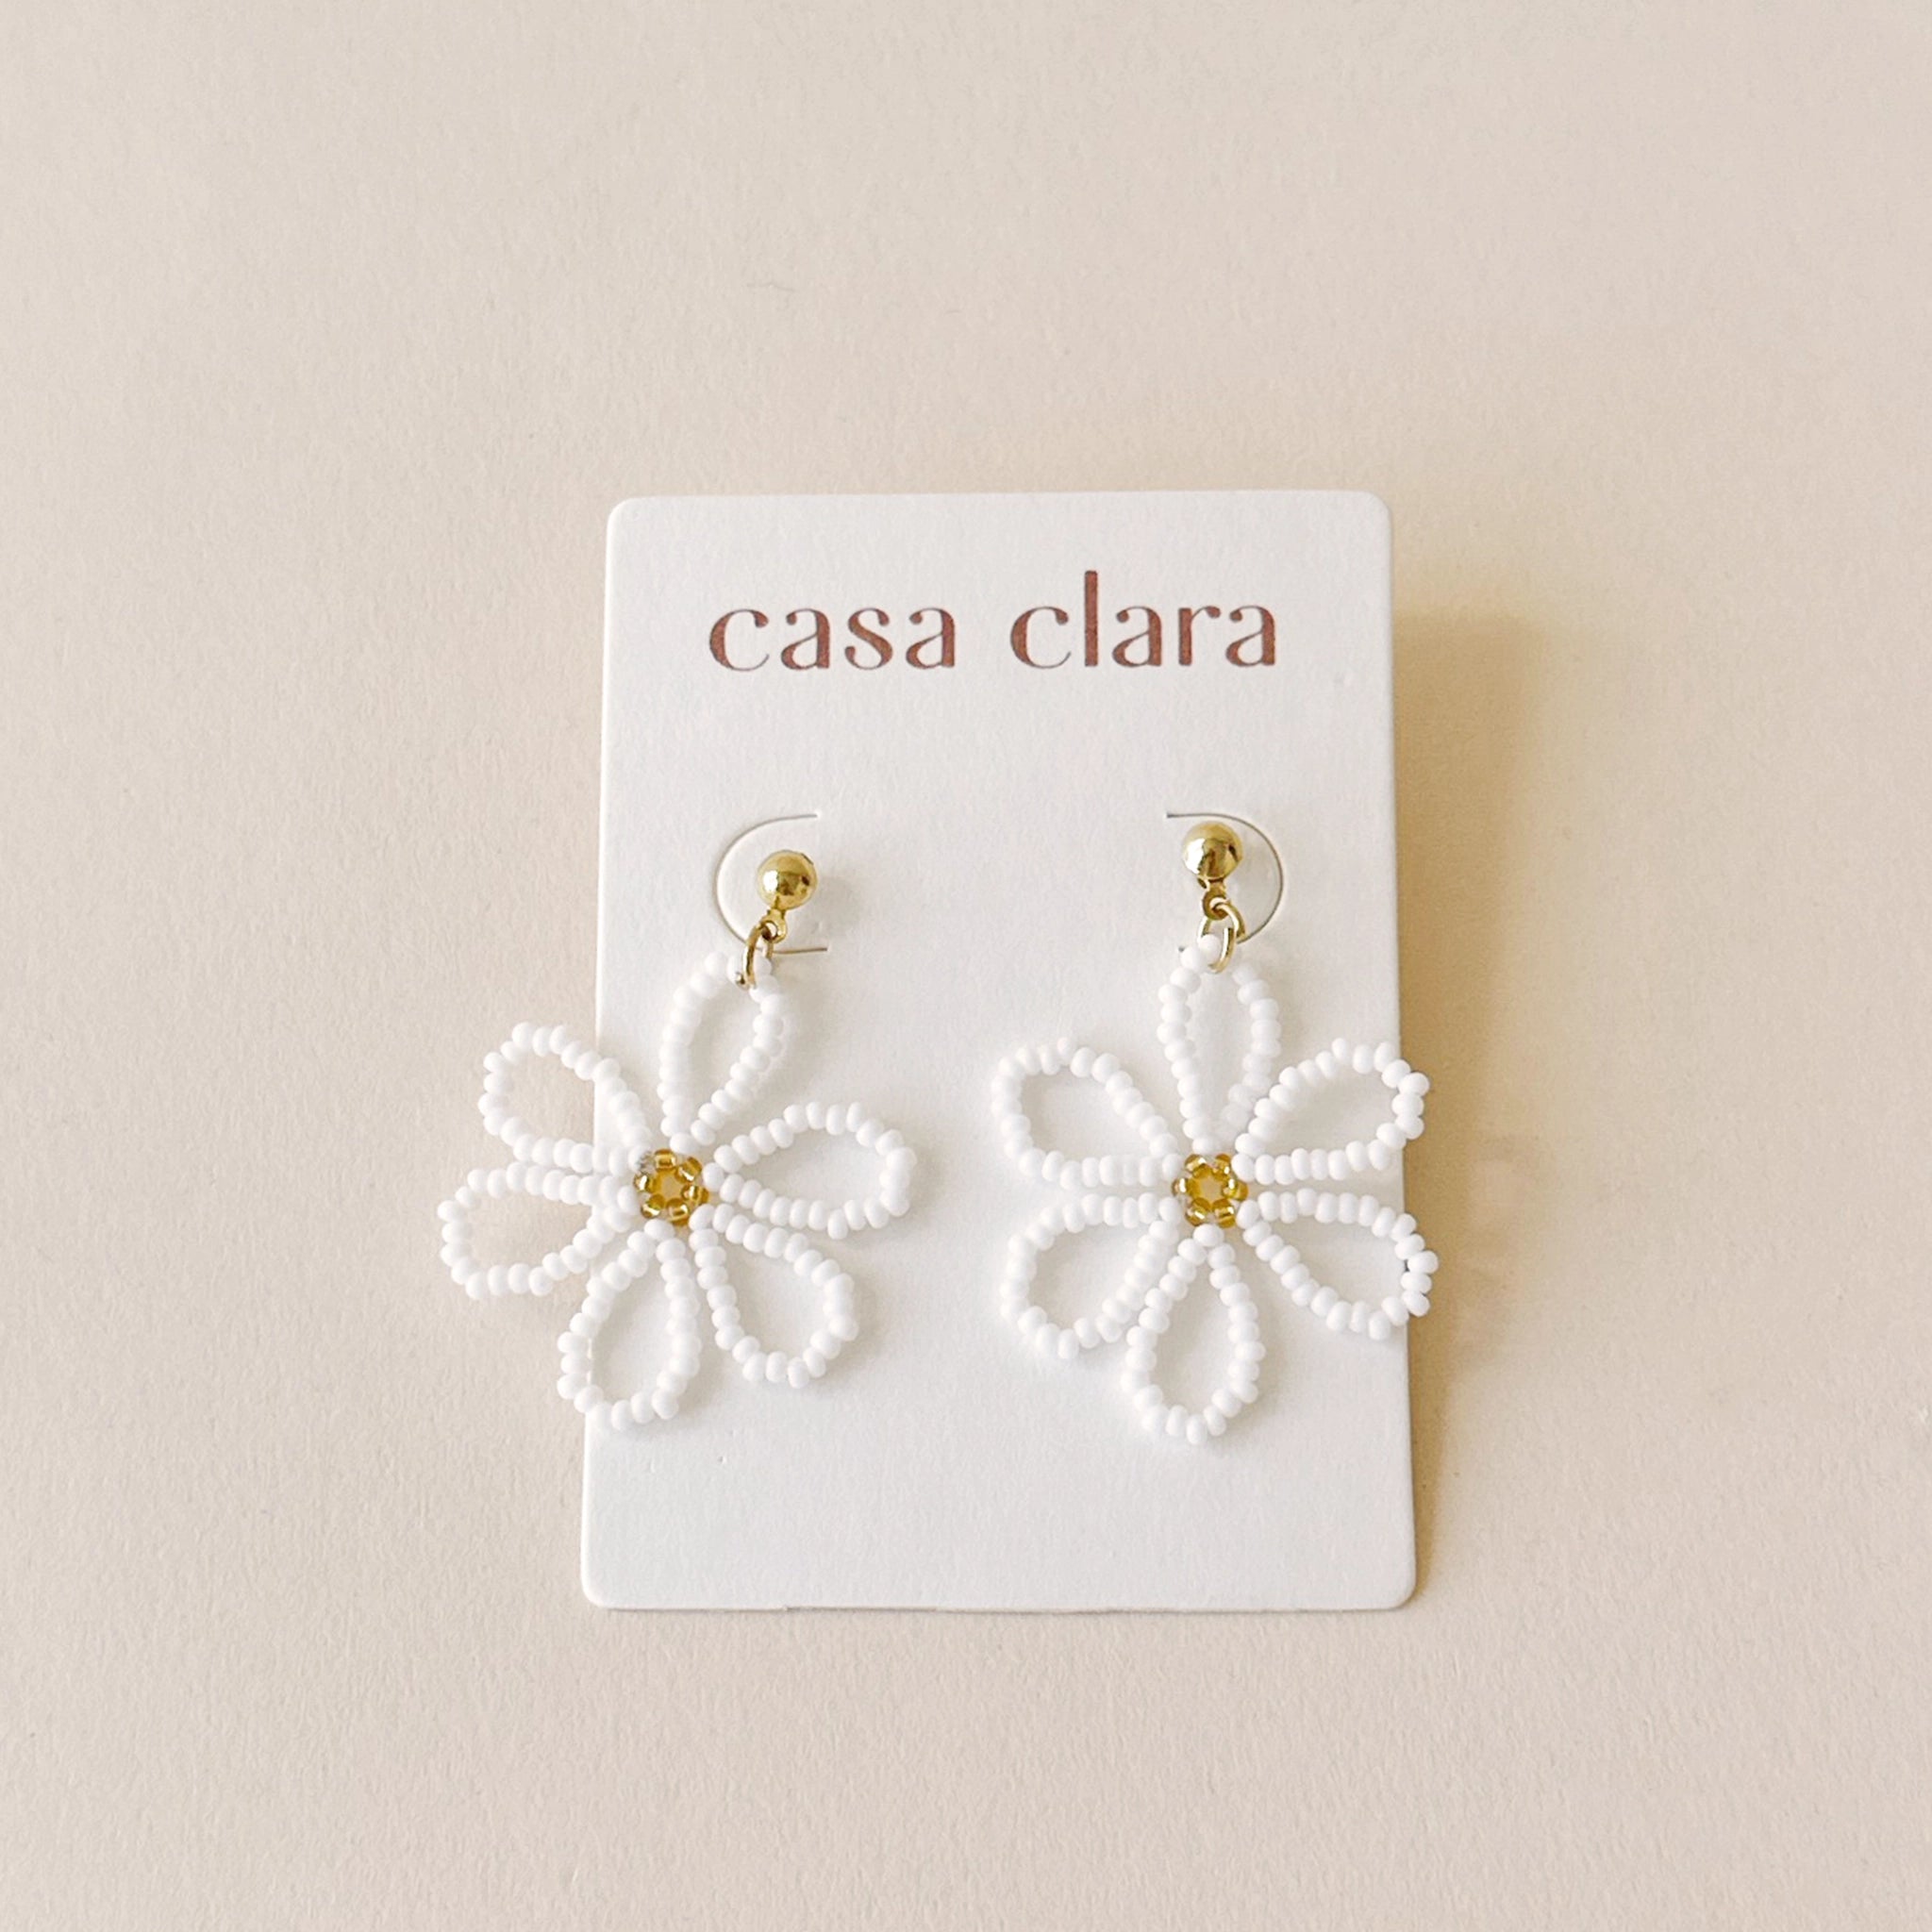 Gold earrings with a white beaded flower dangling from it with a gold beaded center.